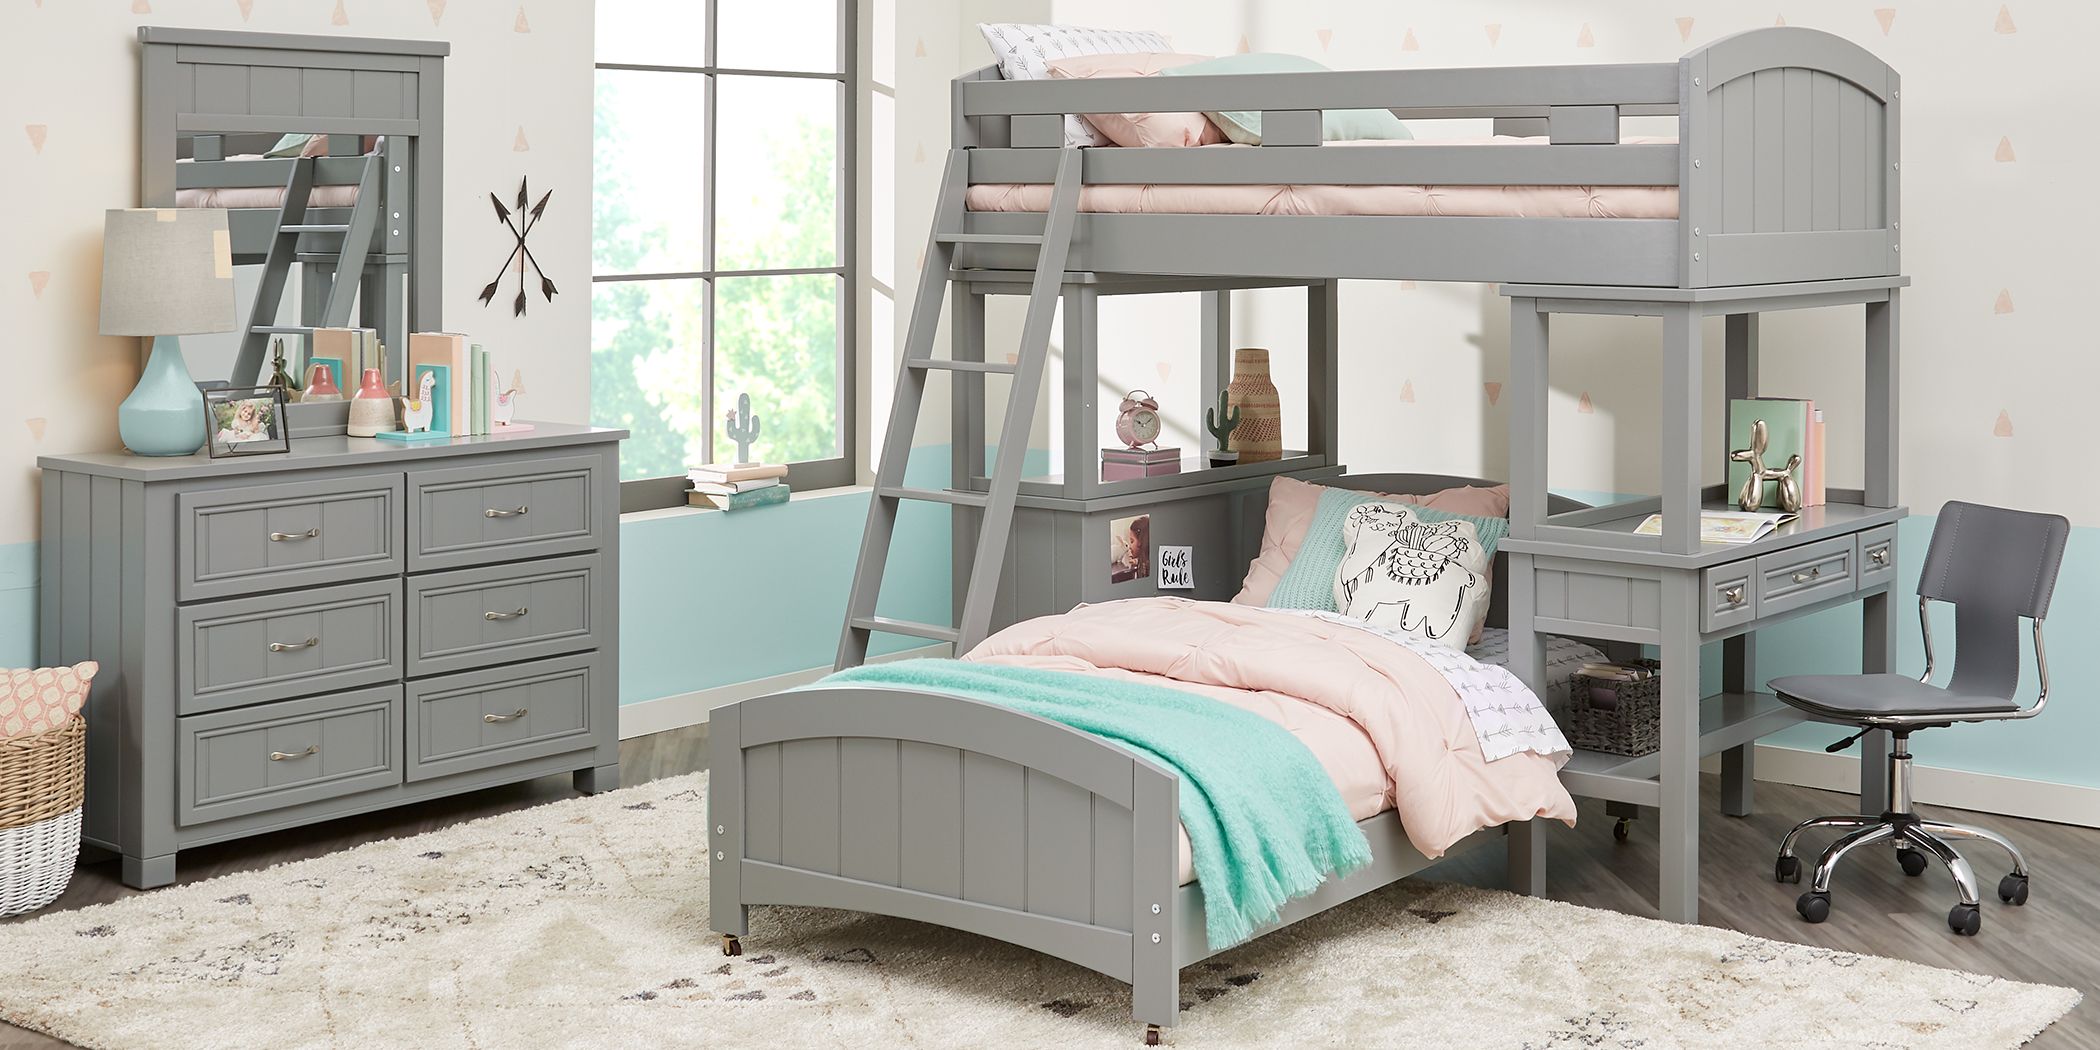 Bunk Beds With Dresser, Twin Loft Bed With Dresser